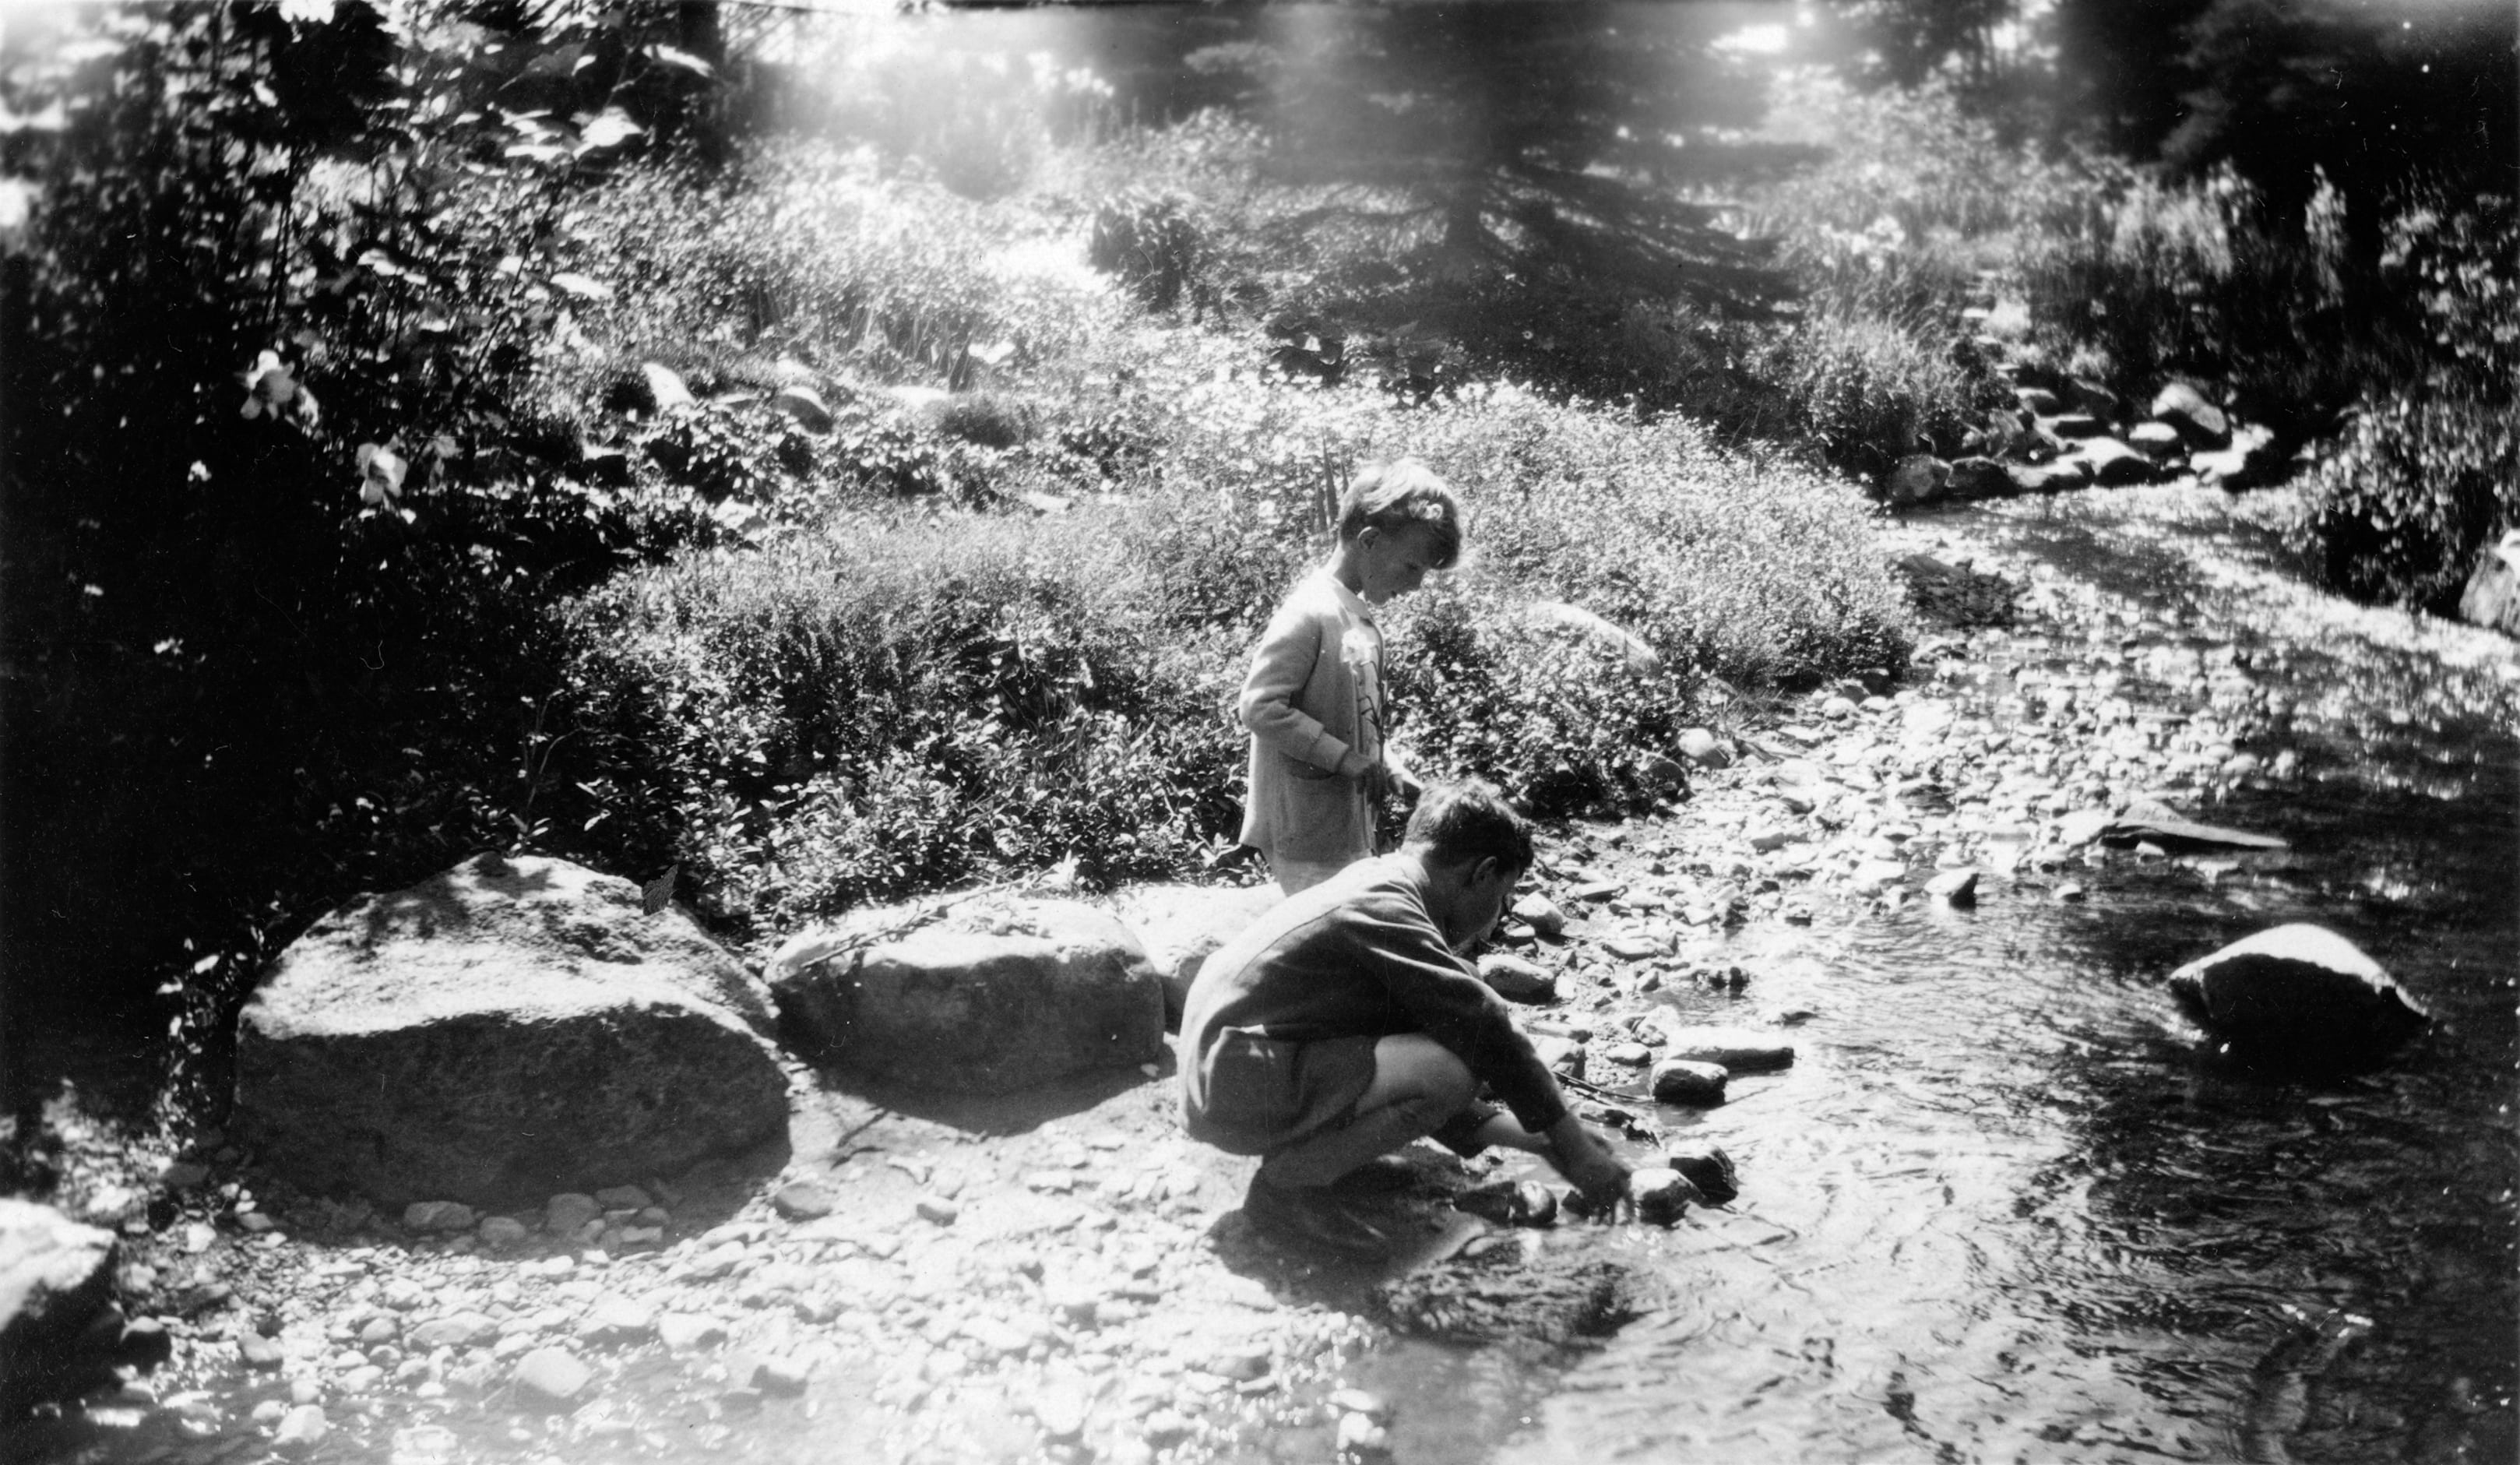 Two children play in a stream in a leafy wood.